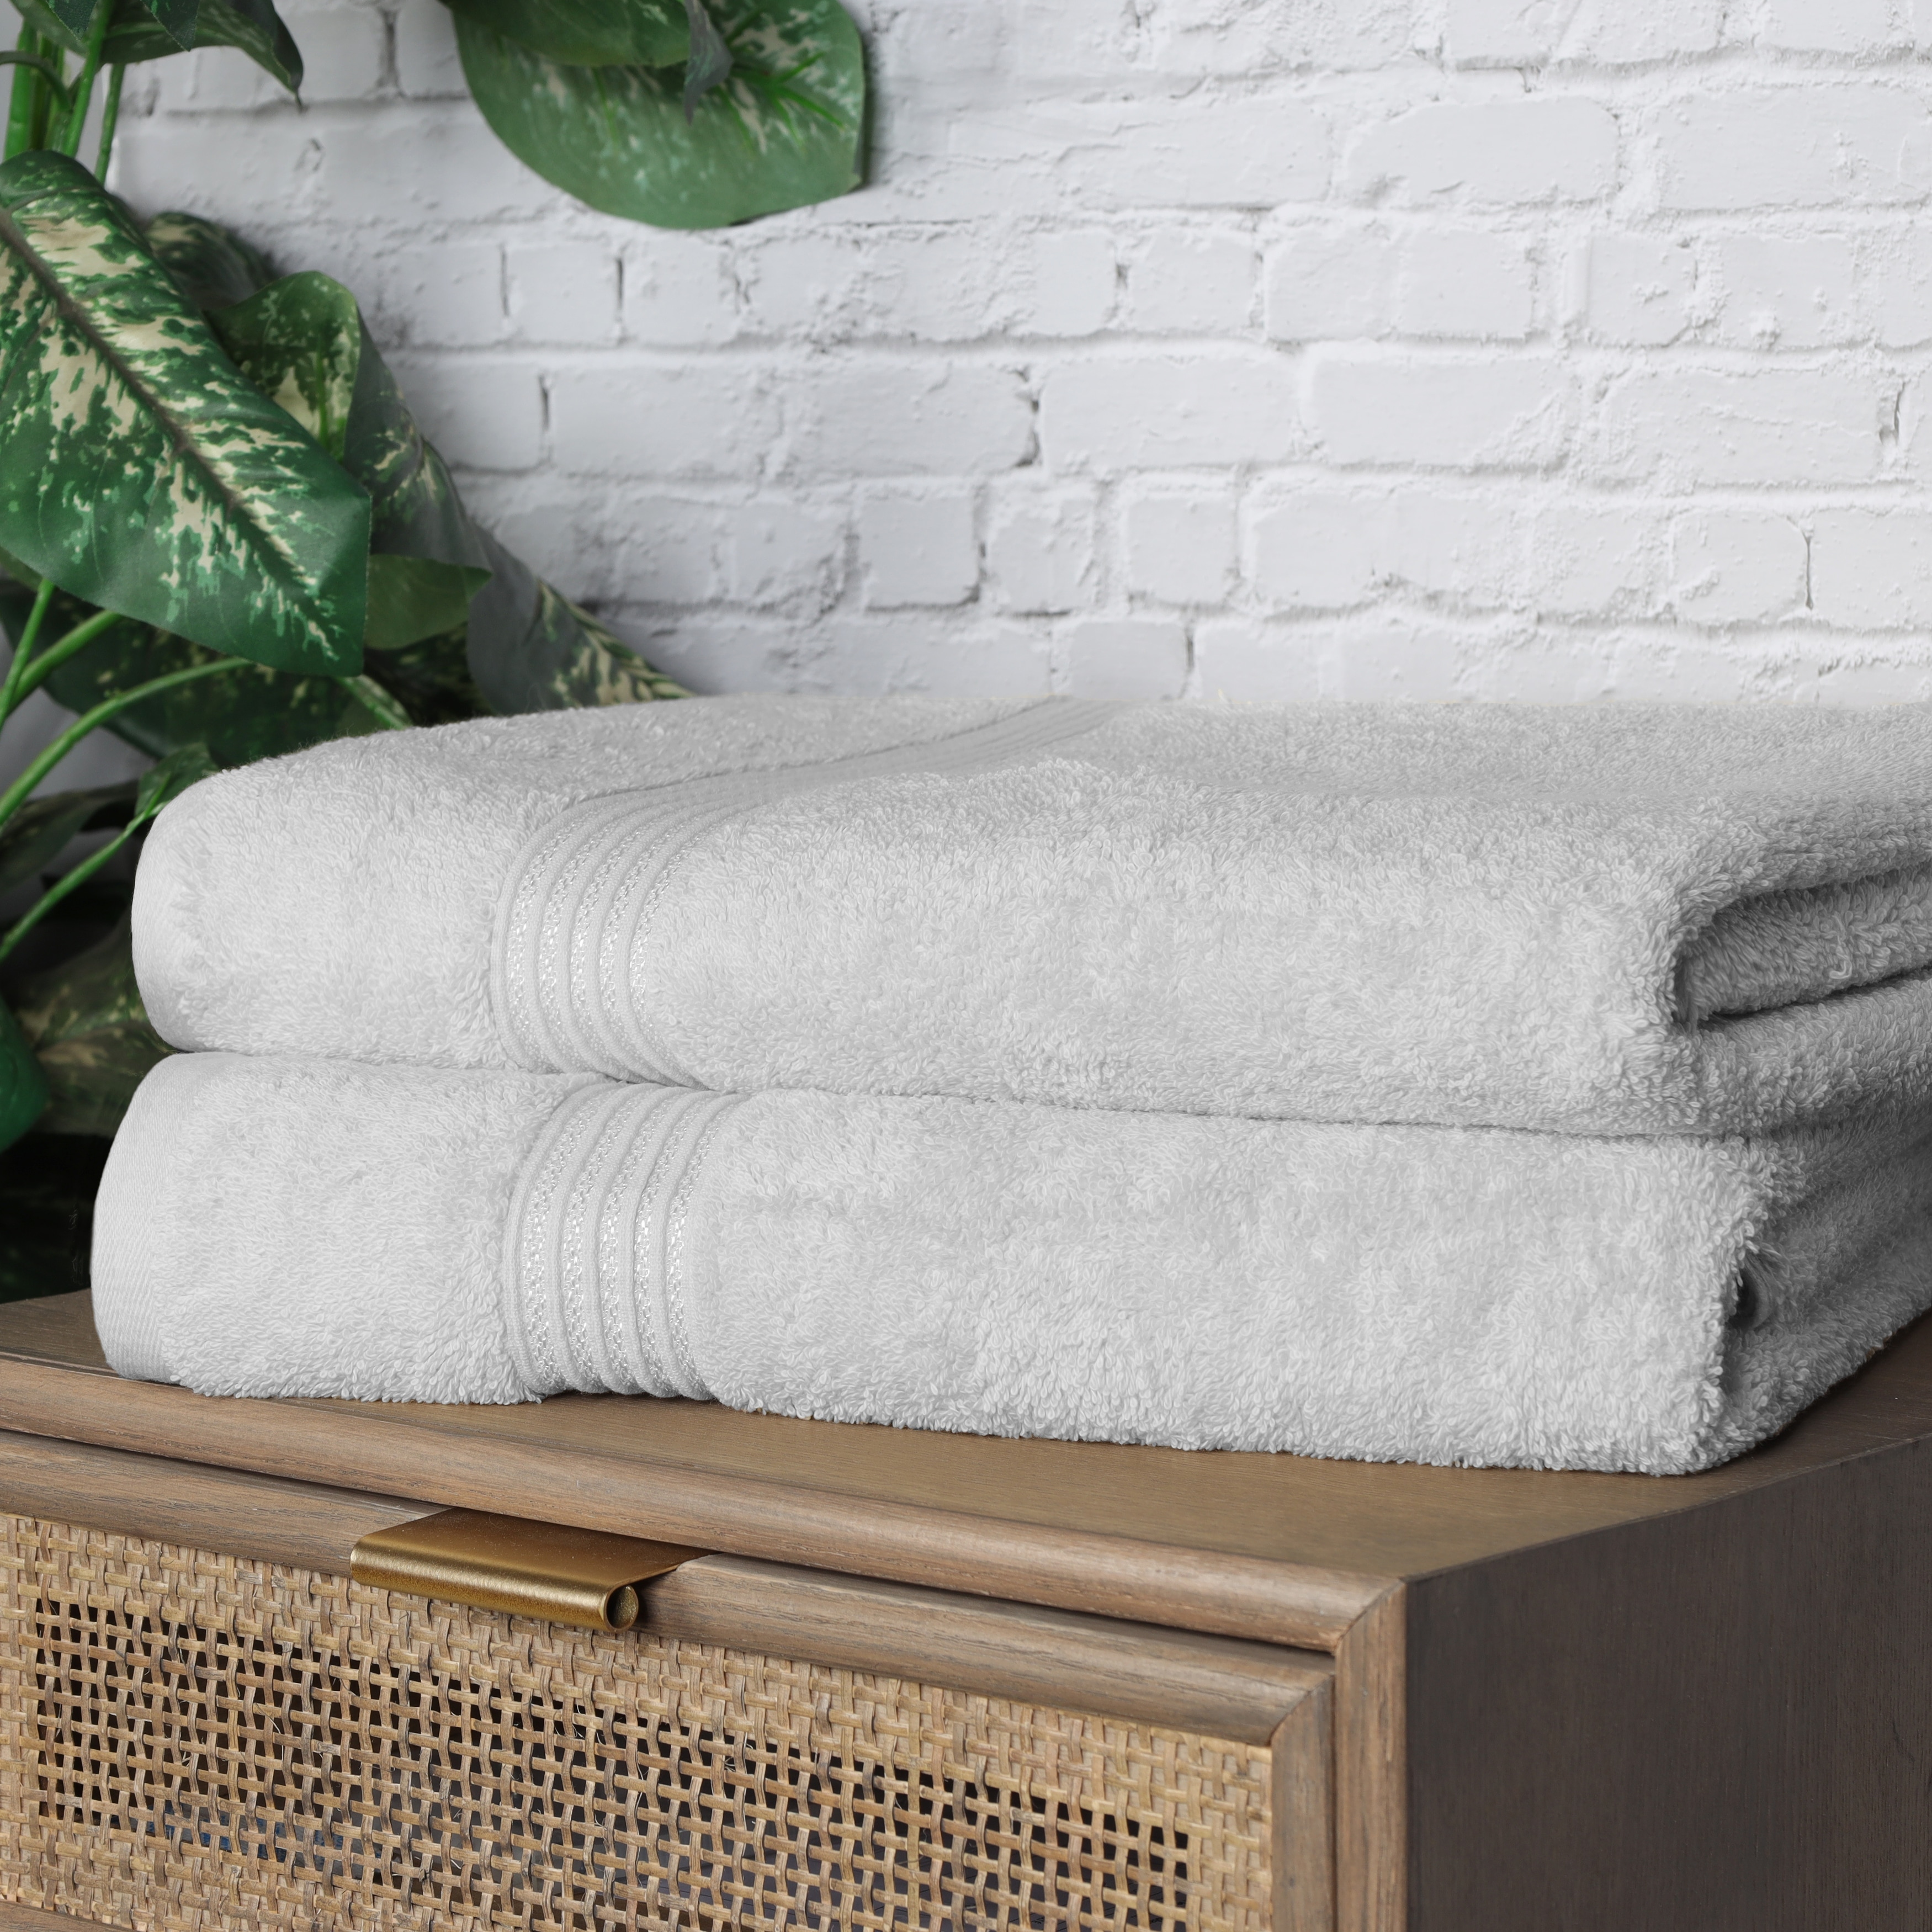  SUPERIOR Egyptian Cotton 800 GSM Towel Set, Includes 2 Bath  Towels, 2 Hand Towels, 2 Face Towels, Luxury Plush Bathroom Essentials,  Ultra Thick, Spa, Shower, Guest Bath, Apartment, Home, Charcoal : Home &  Kitchen